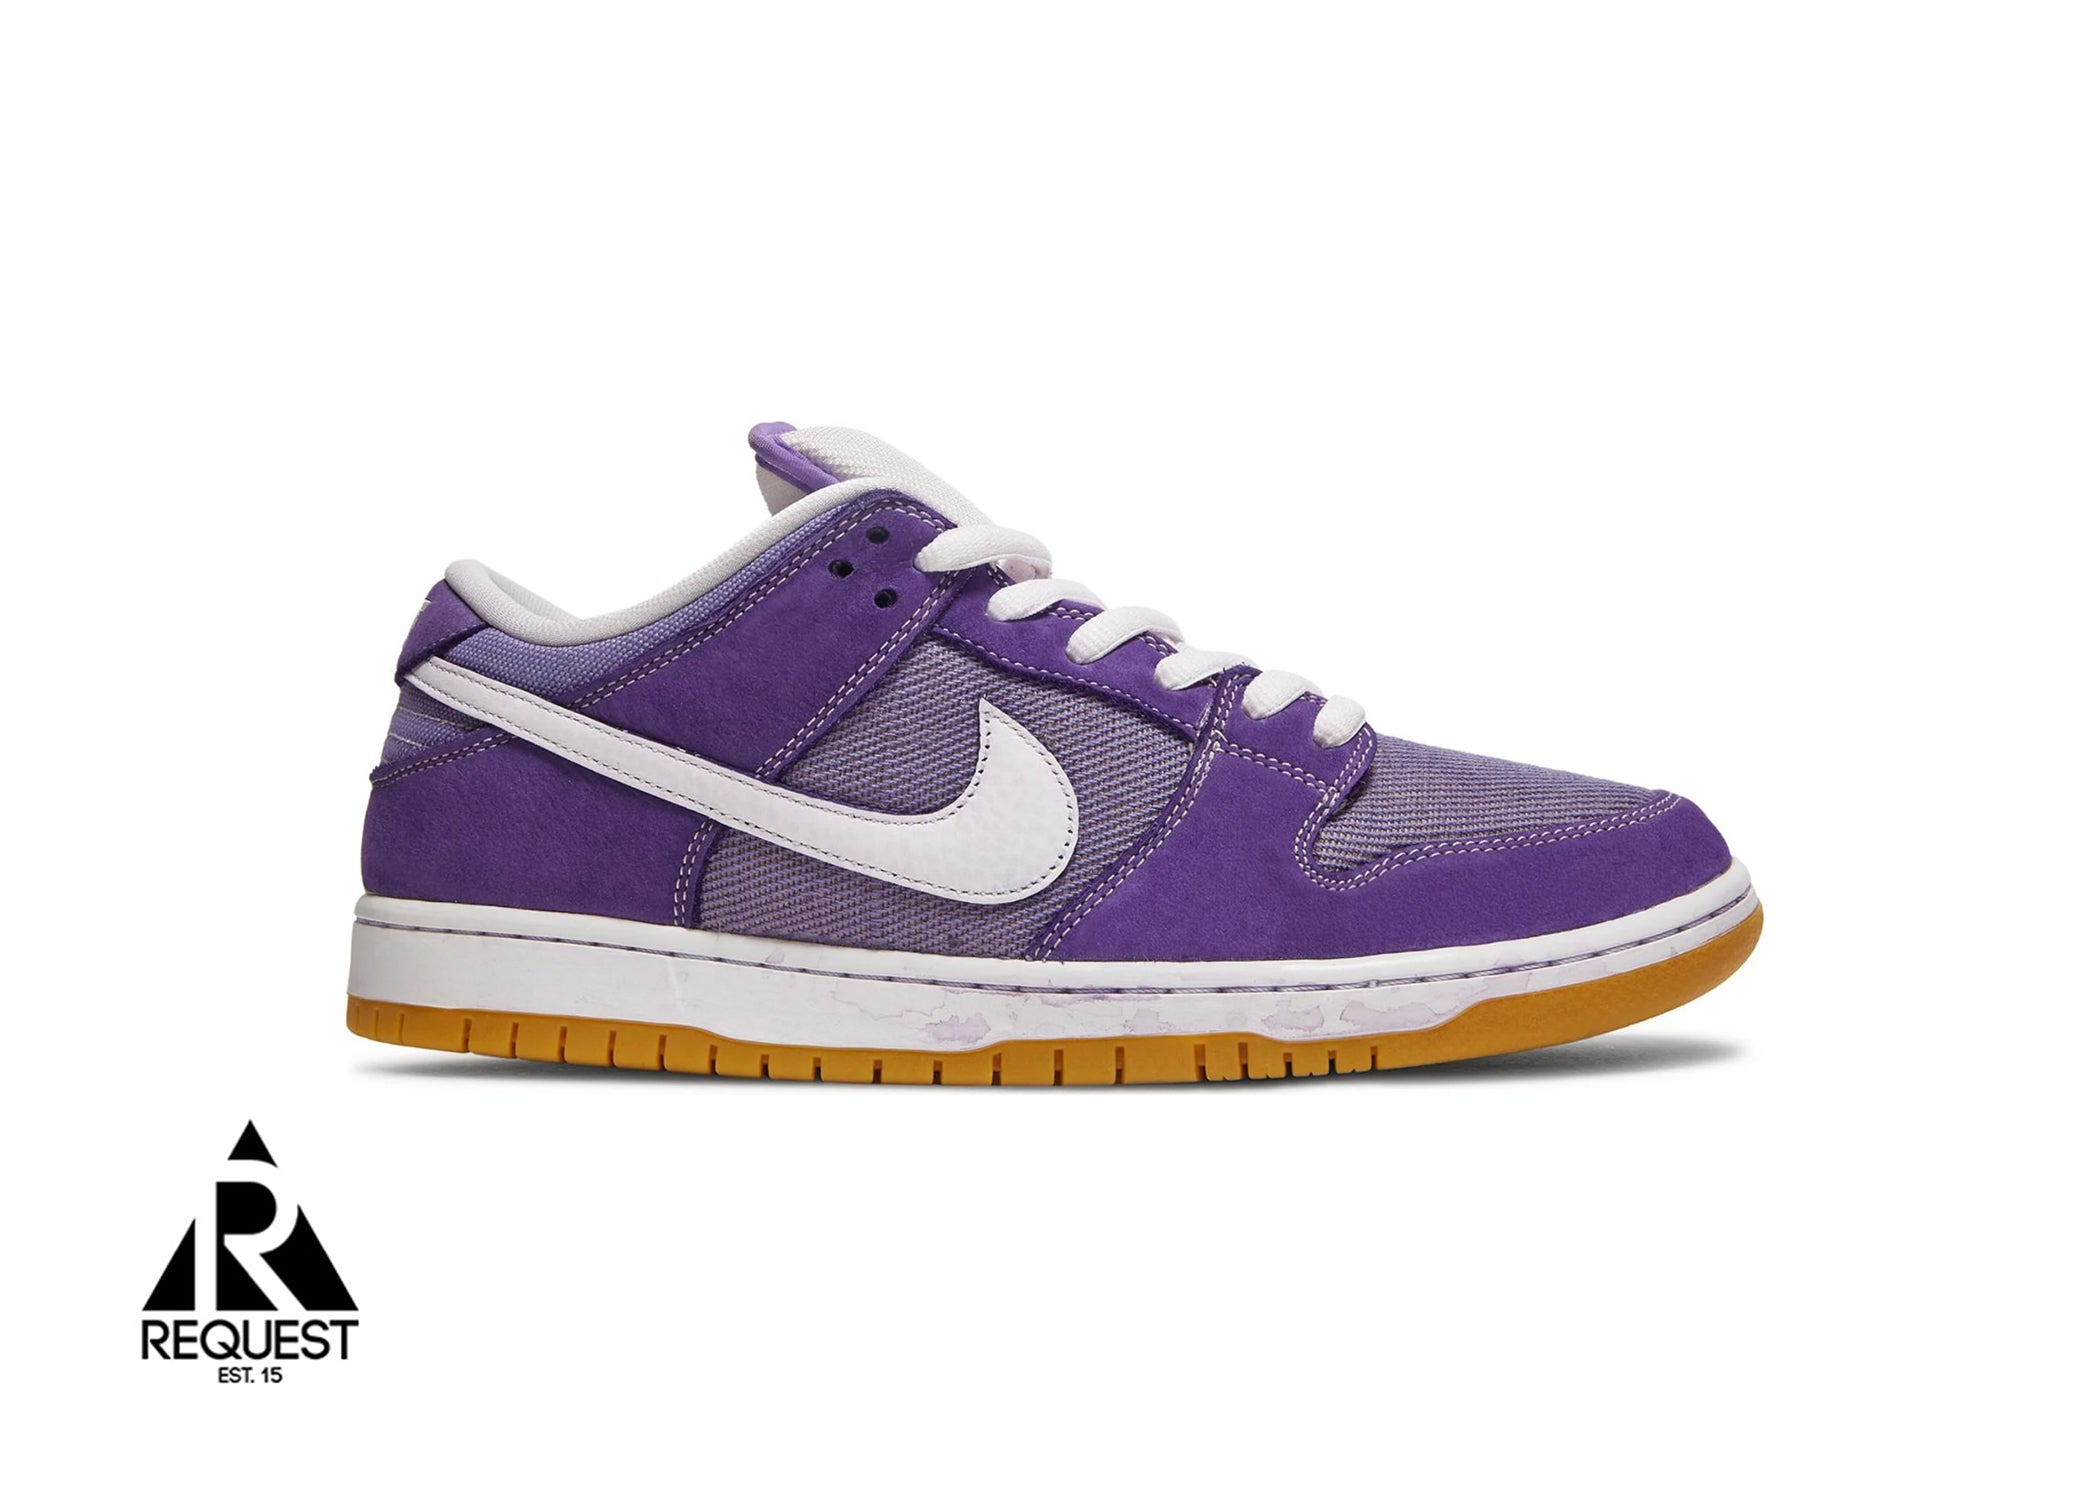 Nike SB Dunk Low Pro ISO Orange Label "Unbleached Pack Lilac"